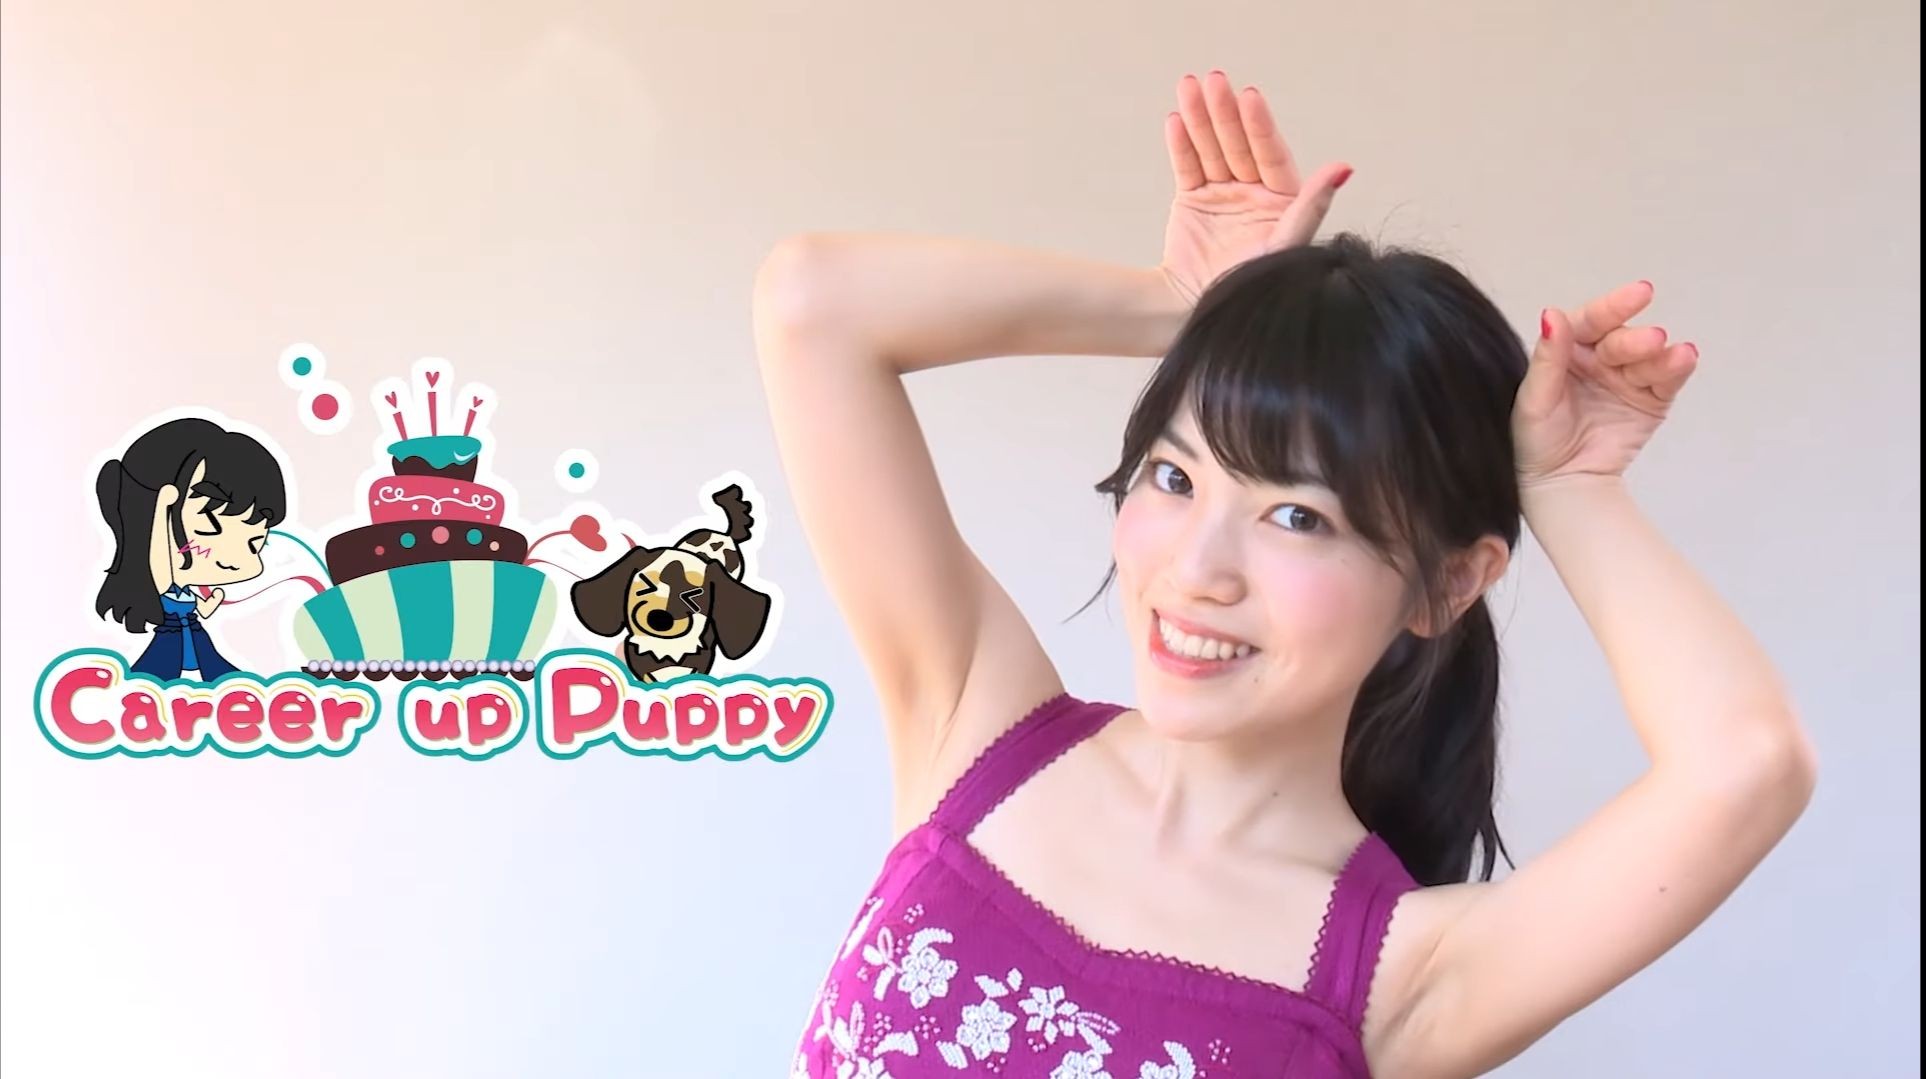 Dancing [Image] Voice Actor Natsuori Ishihara, The Armpit Is Noticed That Too Erotic Is Beautiful Www Www Blackmail